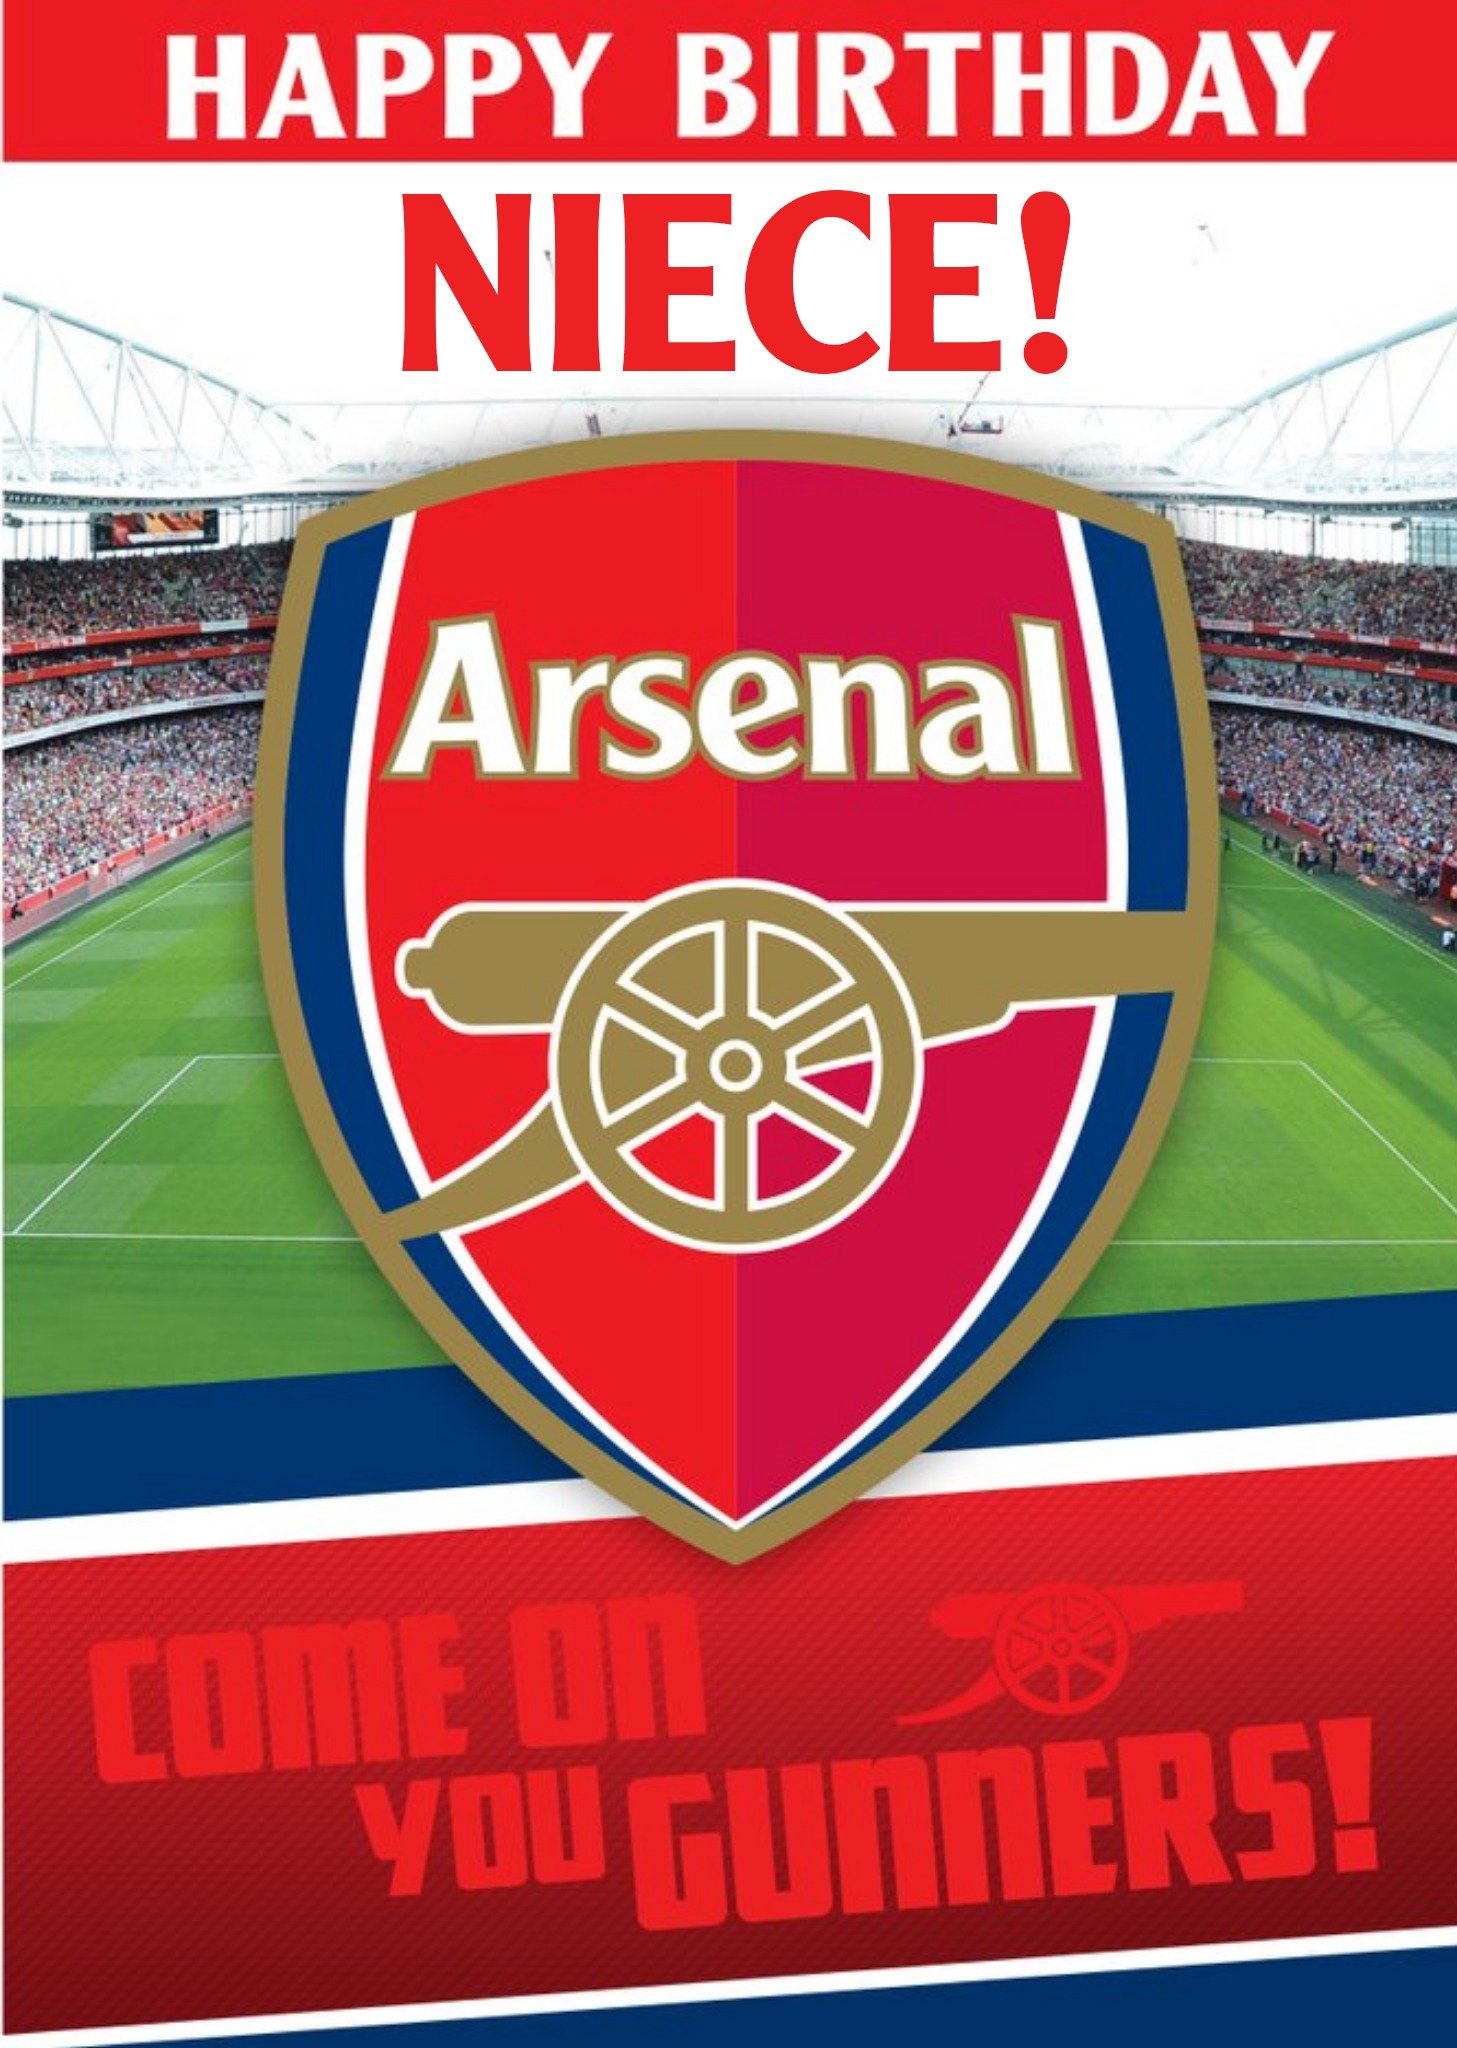 Arsenal Football Stadium Come On You Gunners Niece Happy Birthday Card, Large